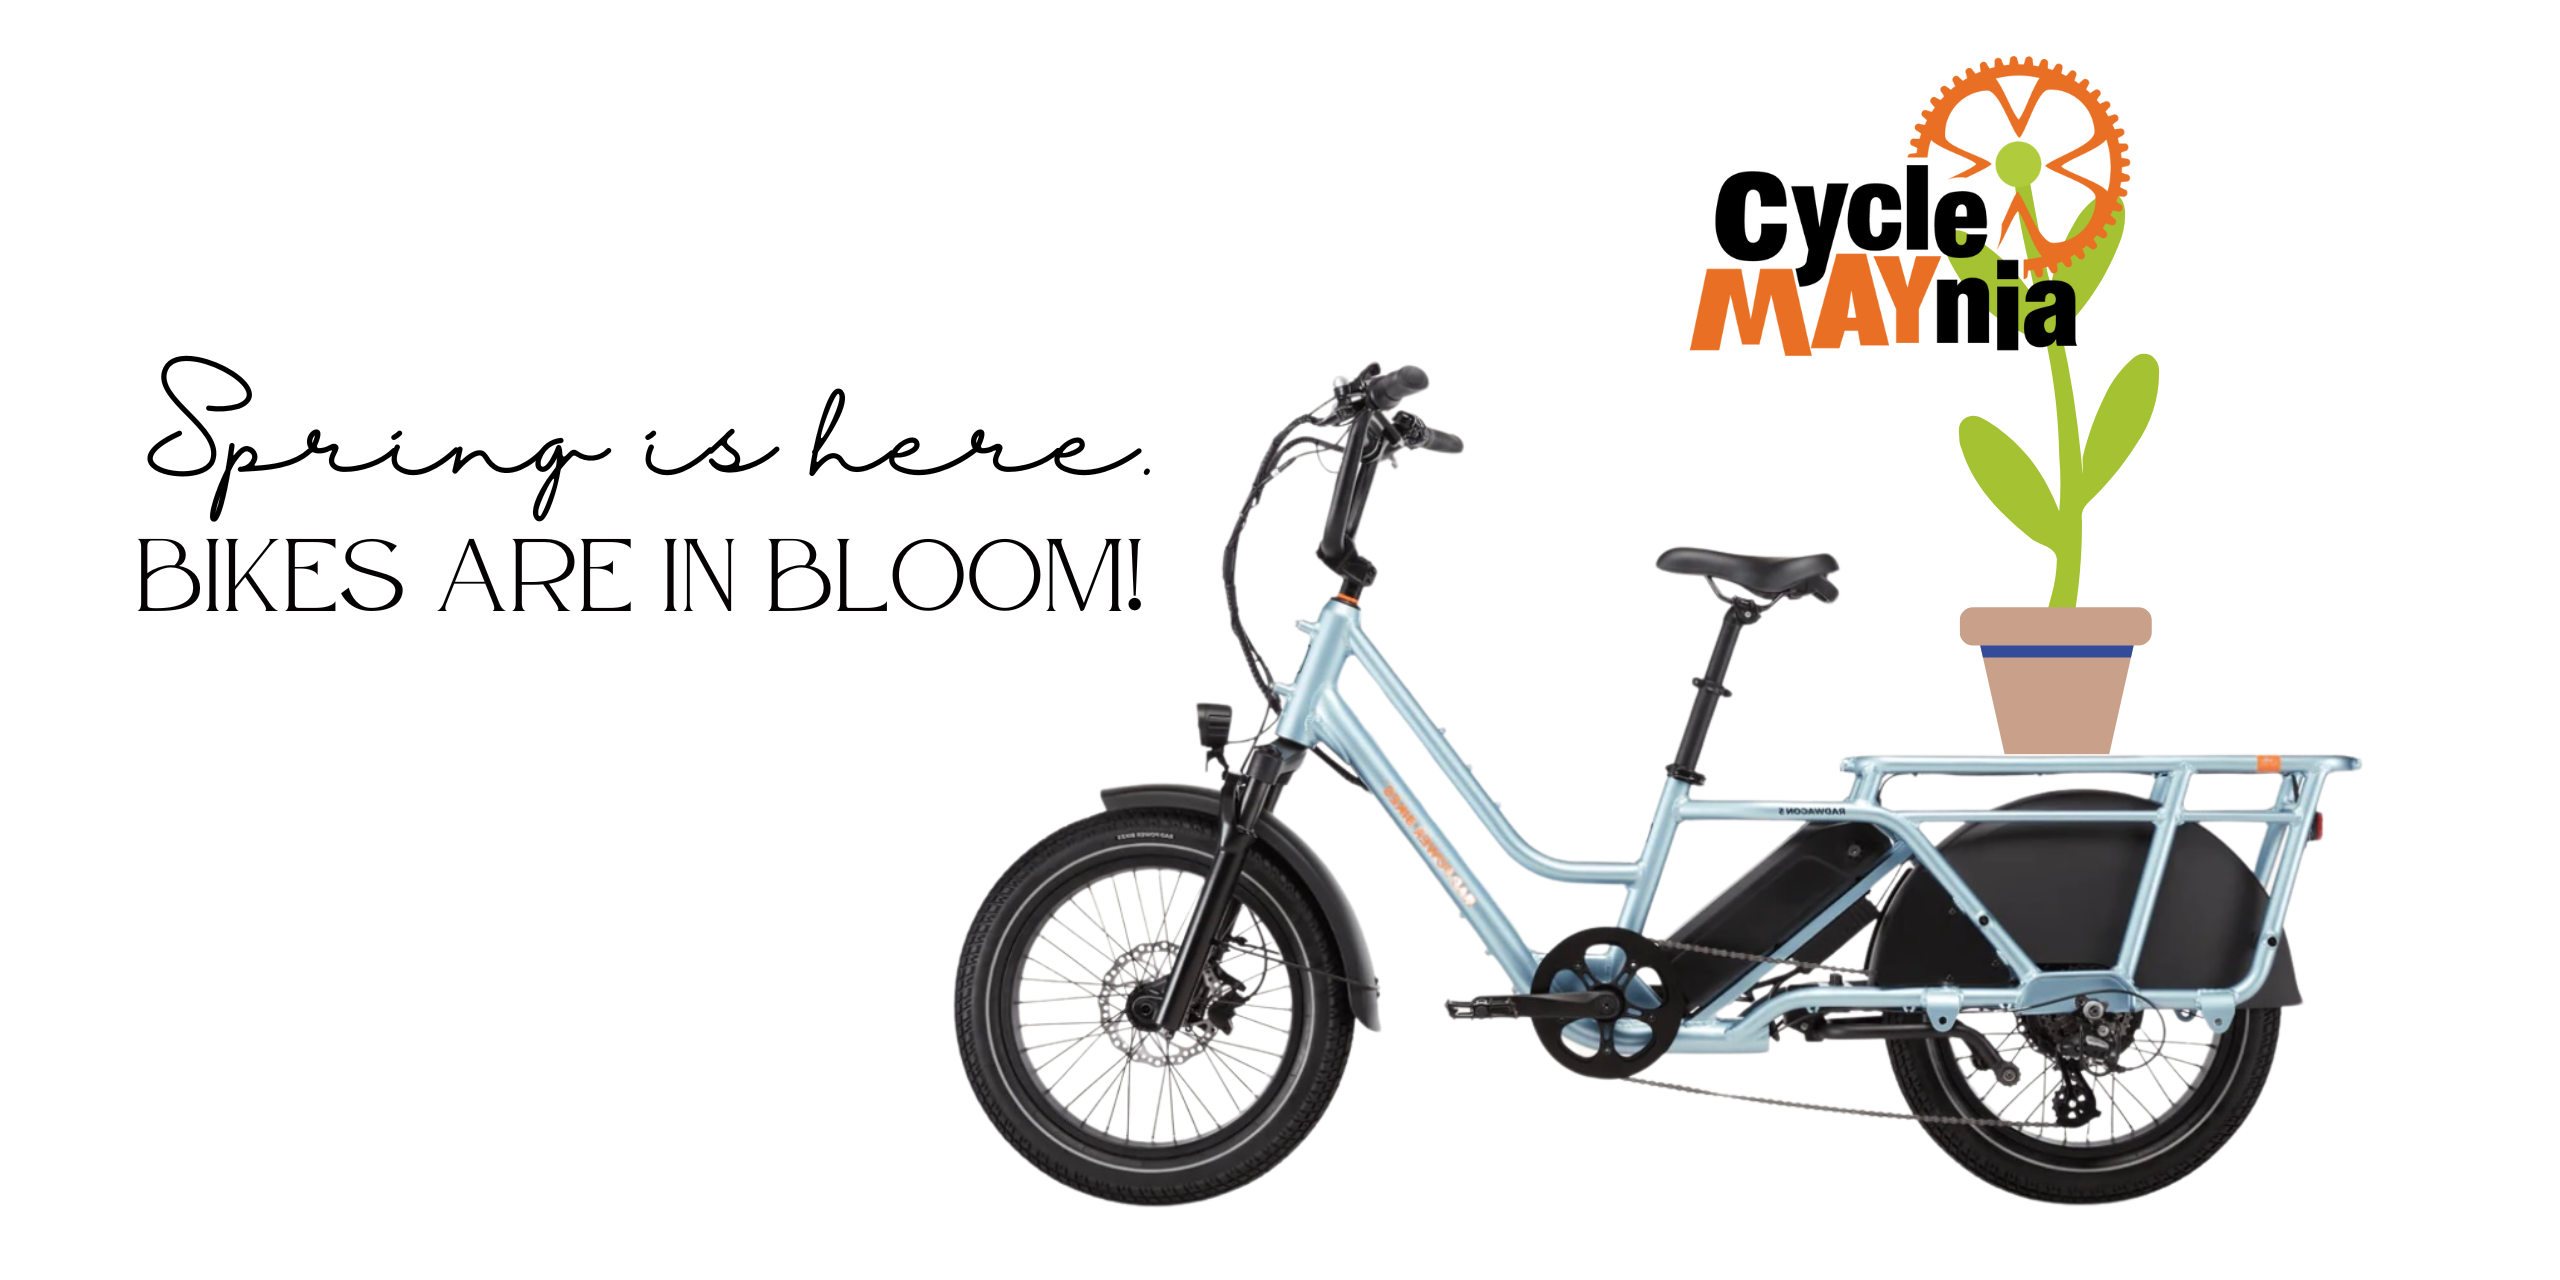 Spring is here. Bikes are in Bloom. CycleMAYnia celebrating National Bike Month.